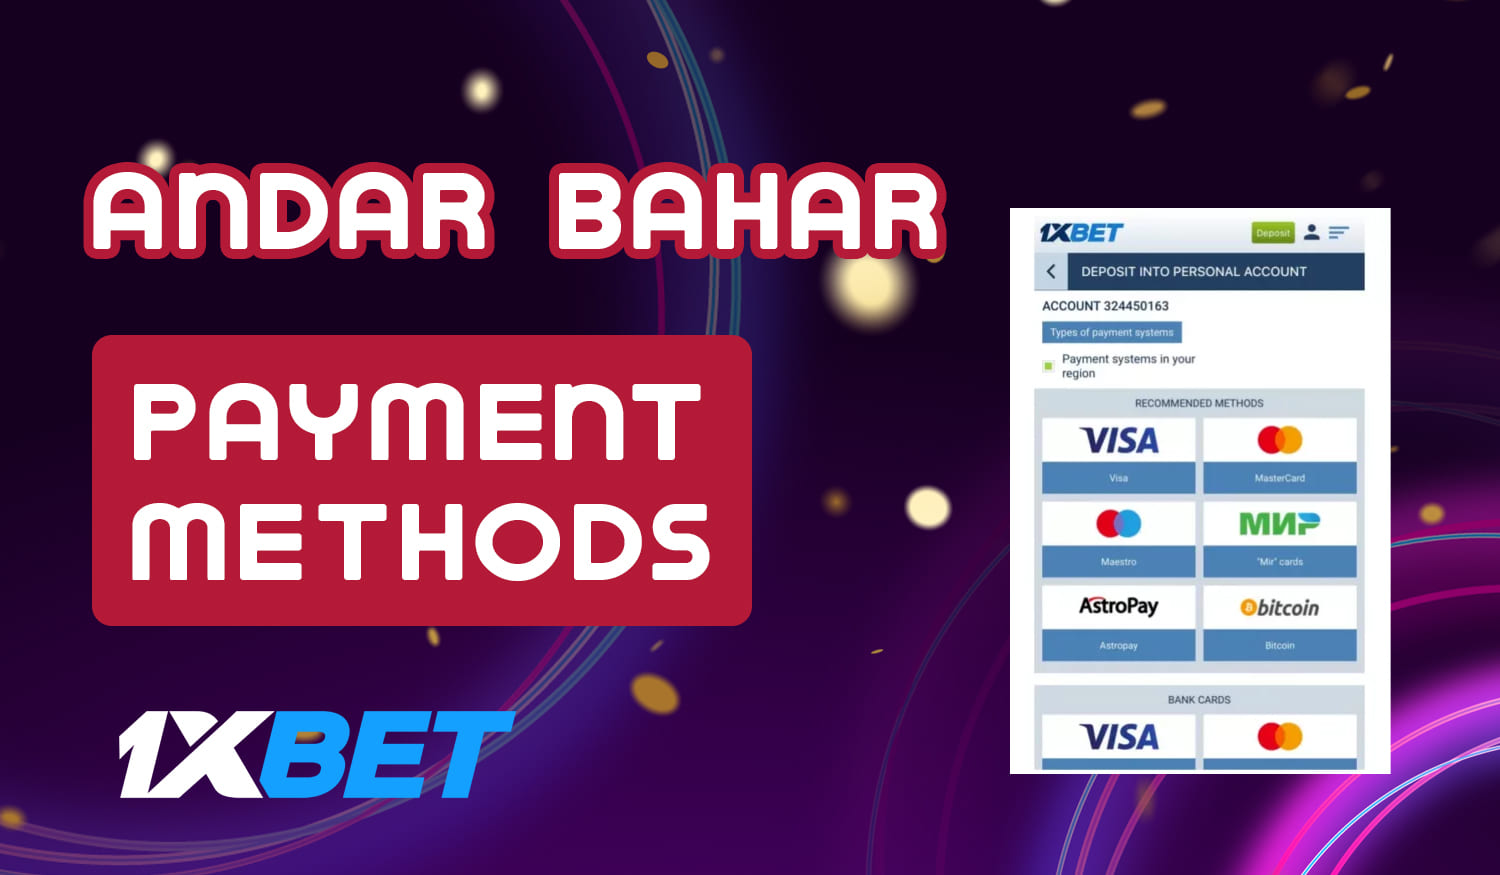 Payment methods for deposit and withdrawal from 1xBet 